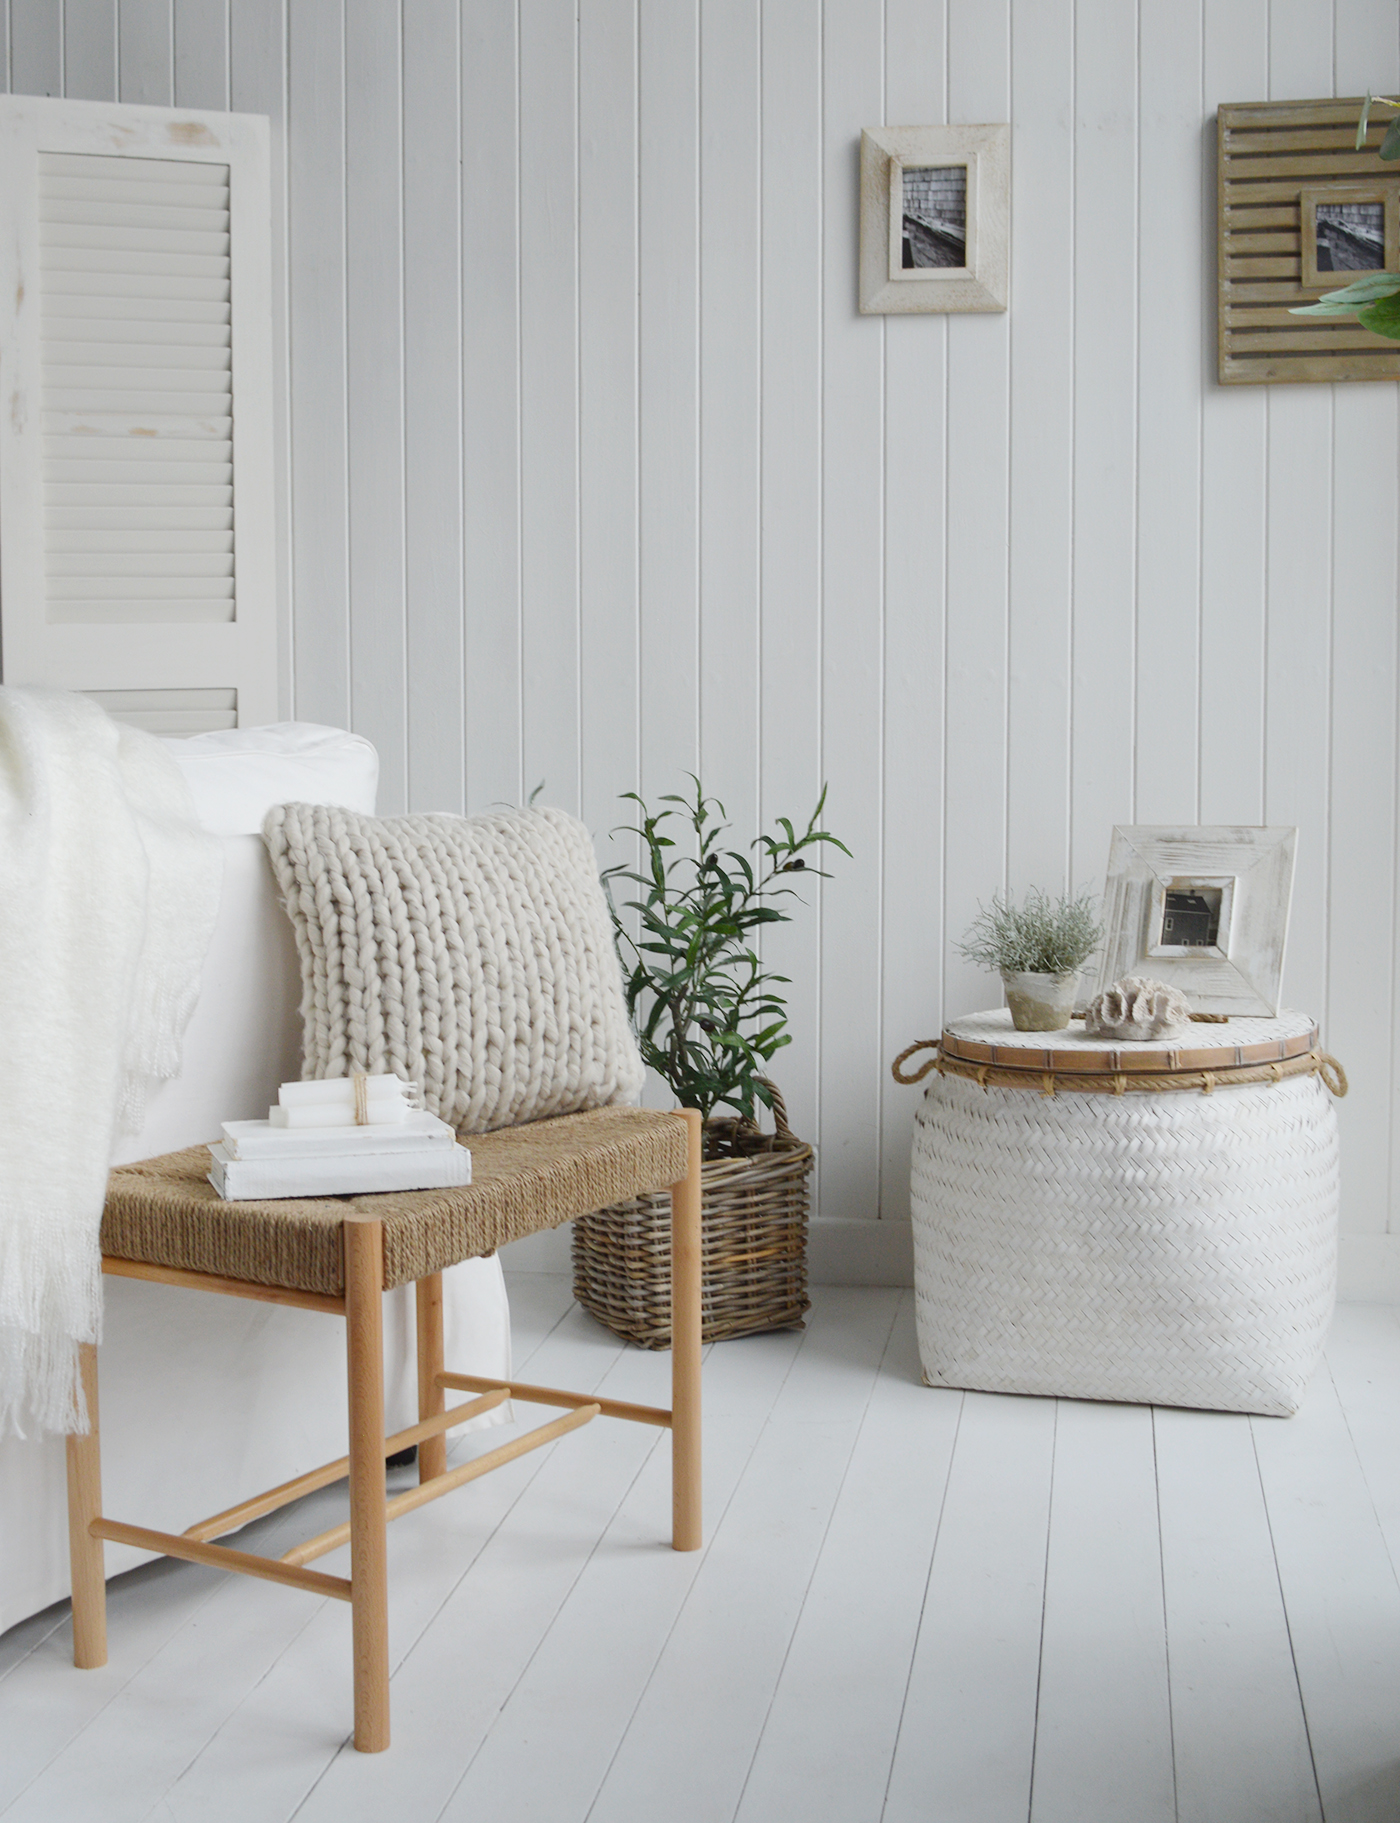 The Wakefield woven bench with a hemp rope seat to create a contrast between the simple lines, perfect for a coastal, beach house or modern farmhouse interior